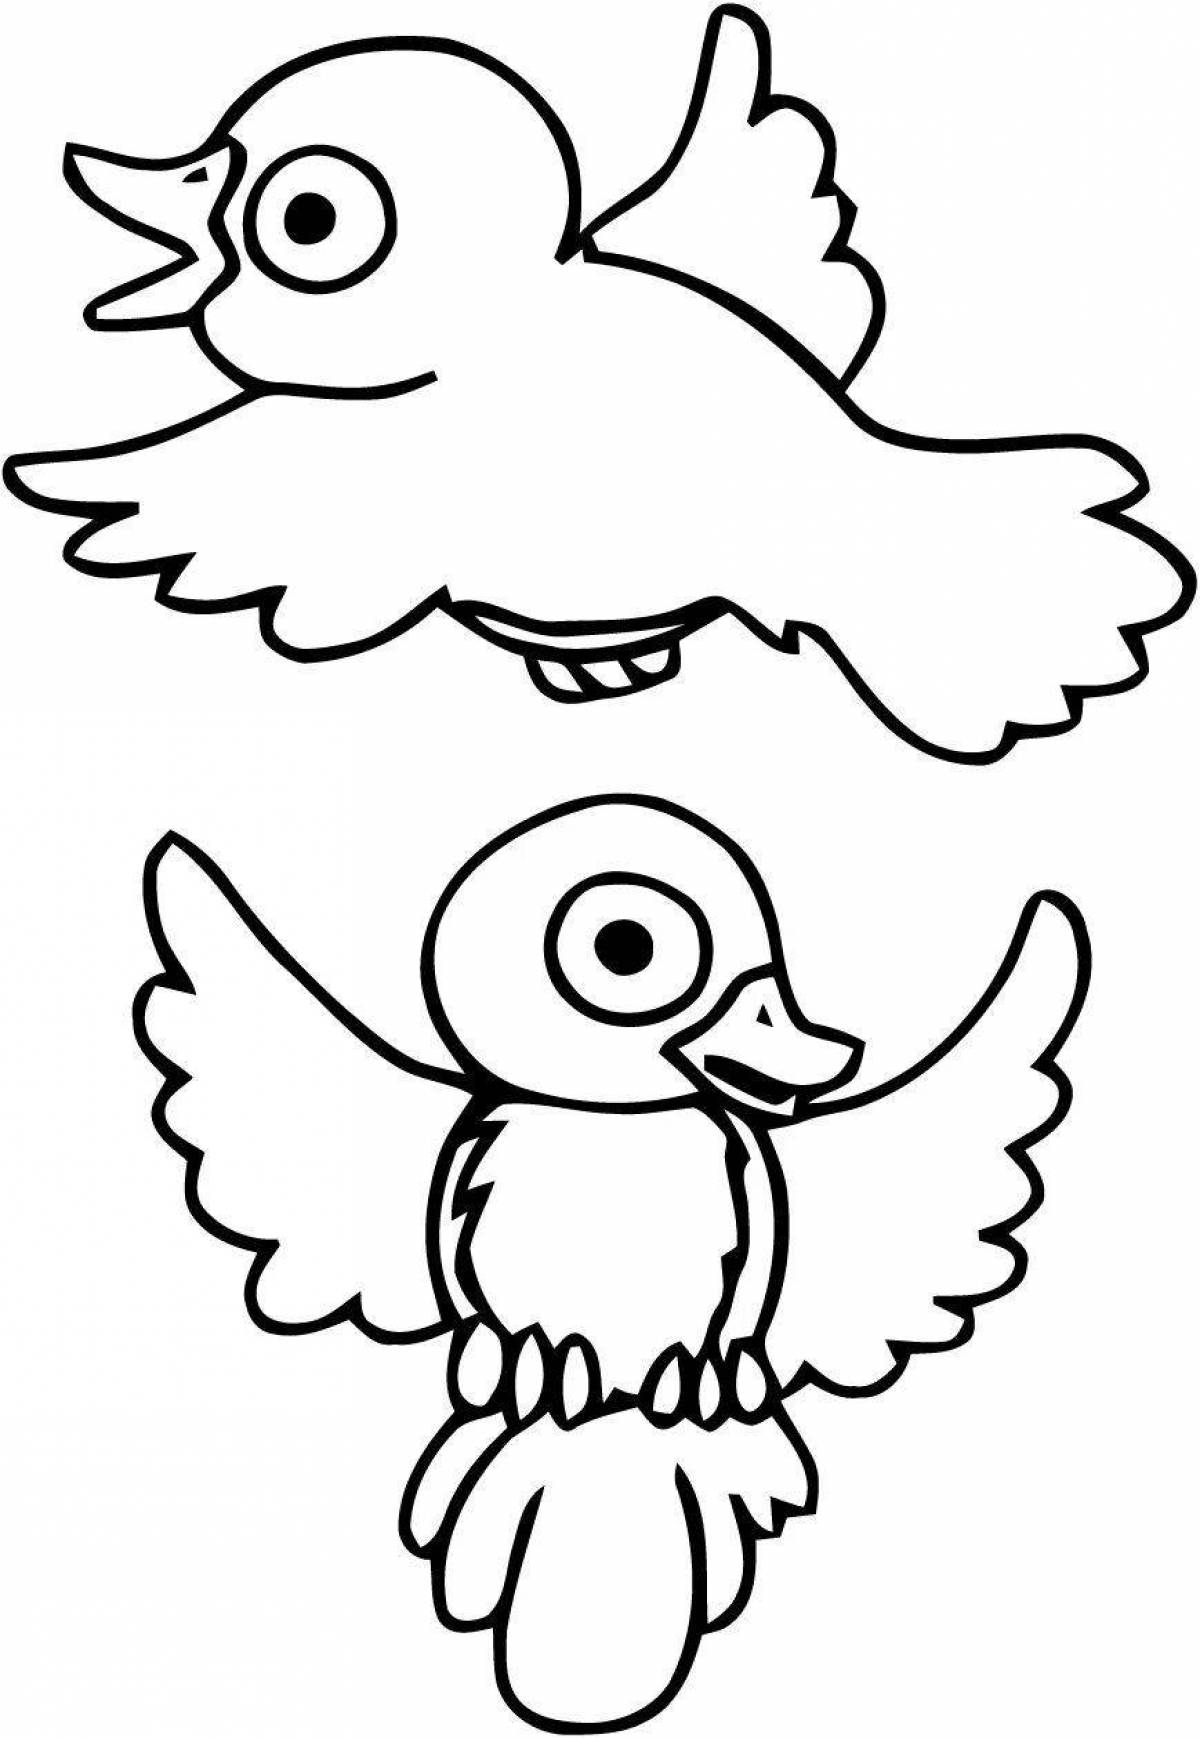 Awesome bird drawing for kids